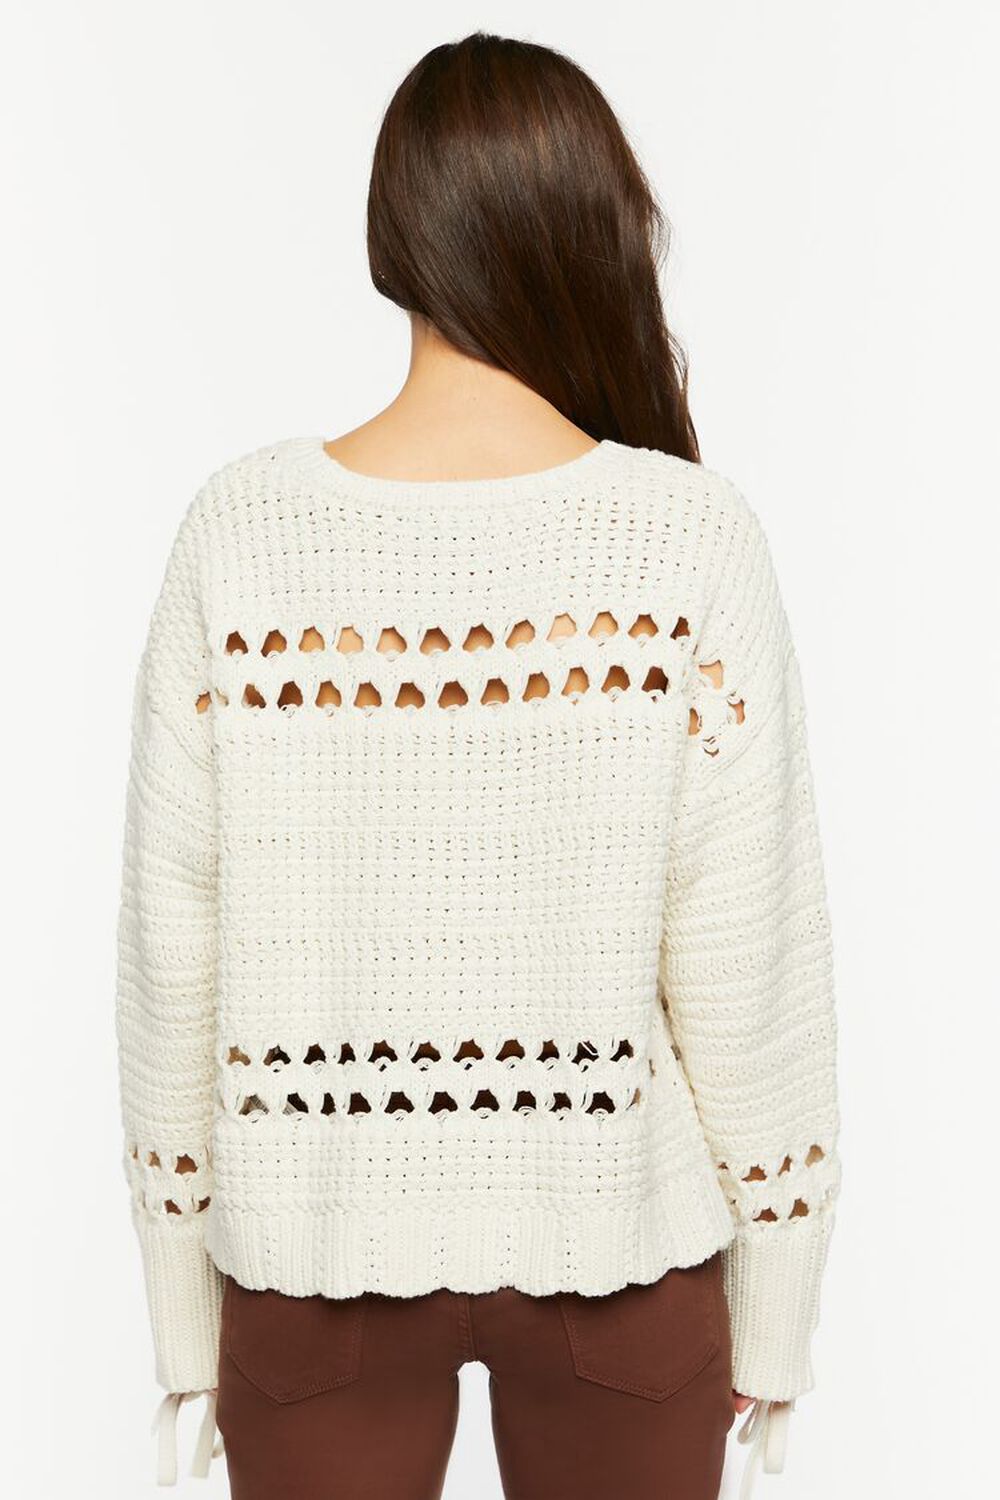 CREAM Pointelle Lace-Up Cutout Sweater, image 3